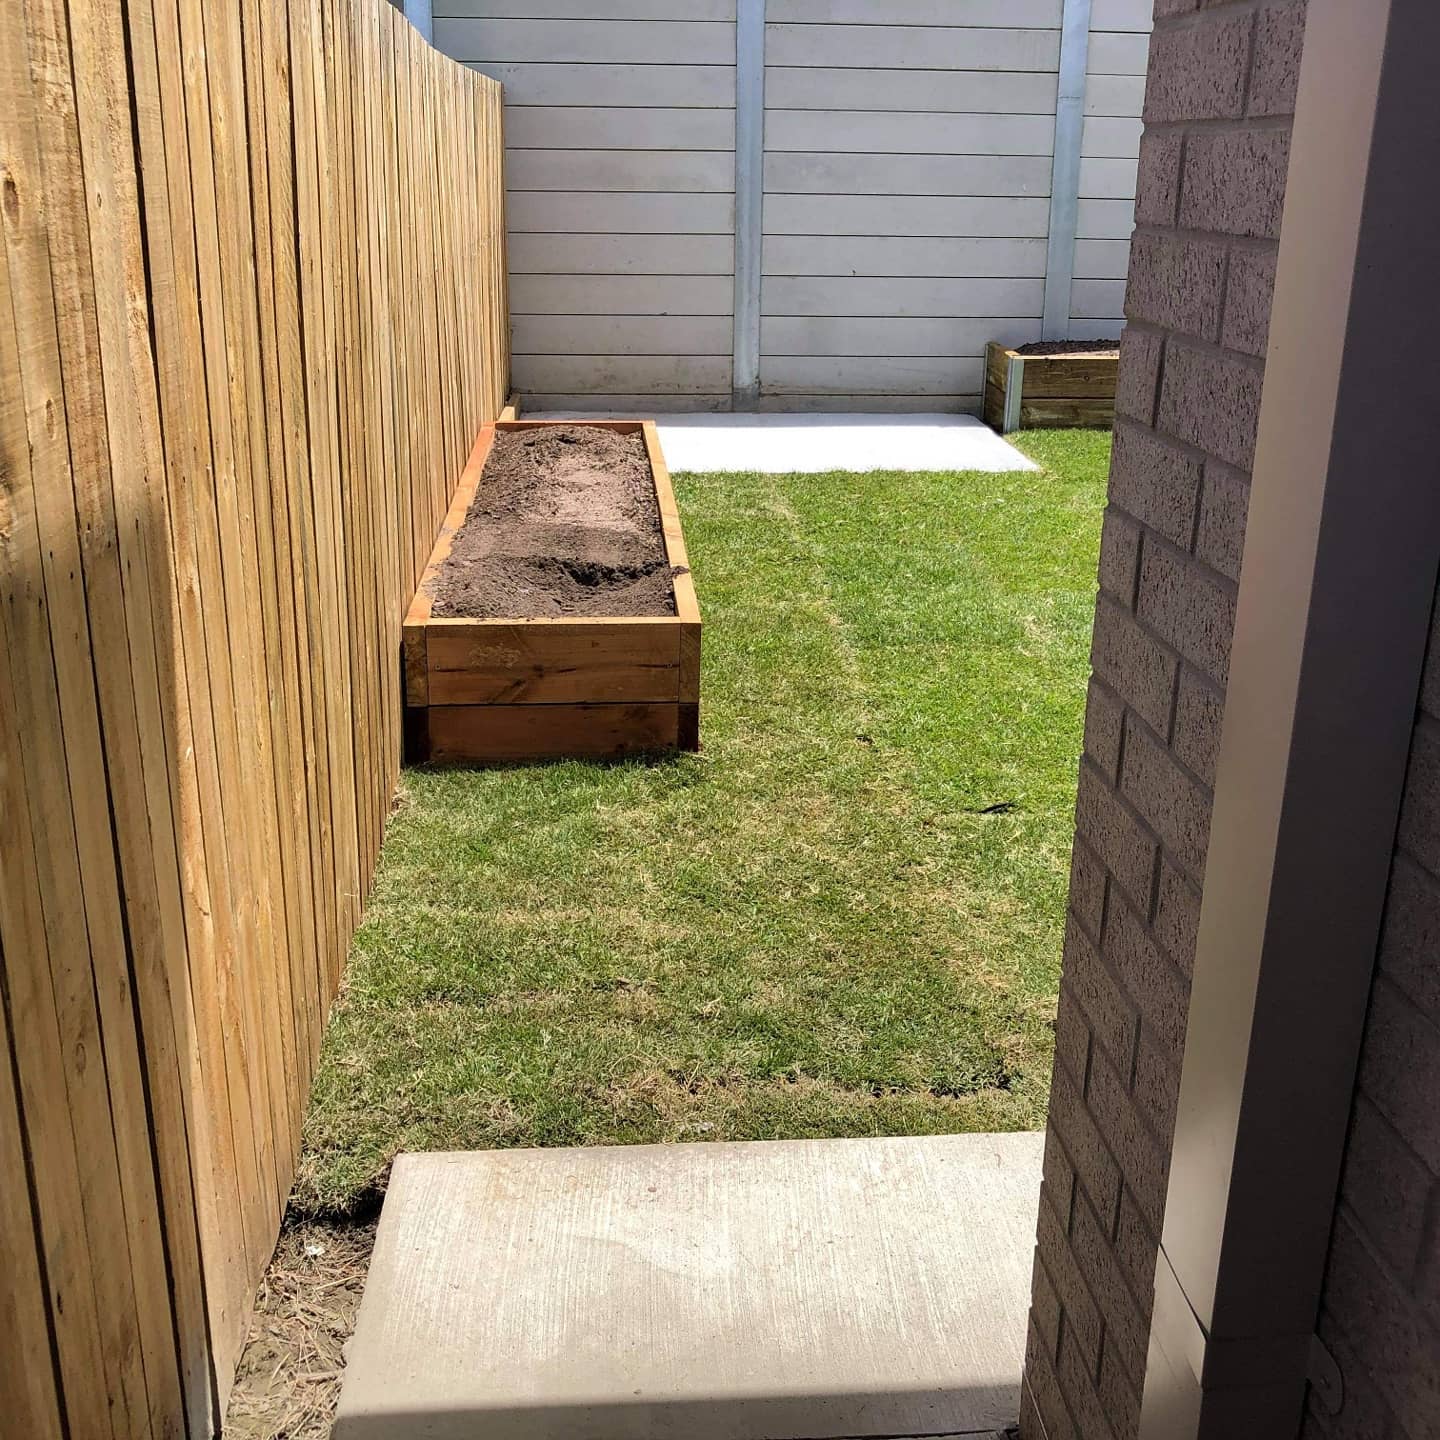 Ripley full house landscaping with retaining, turfing, concrete paths and shed slabs